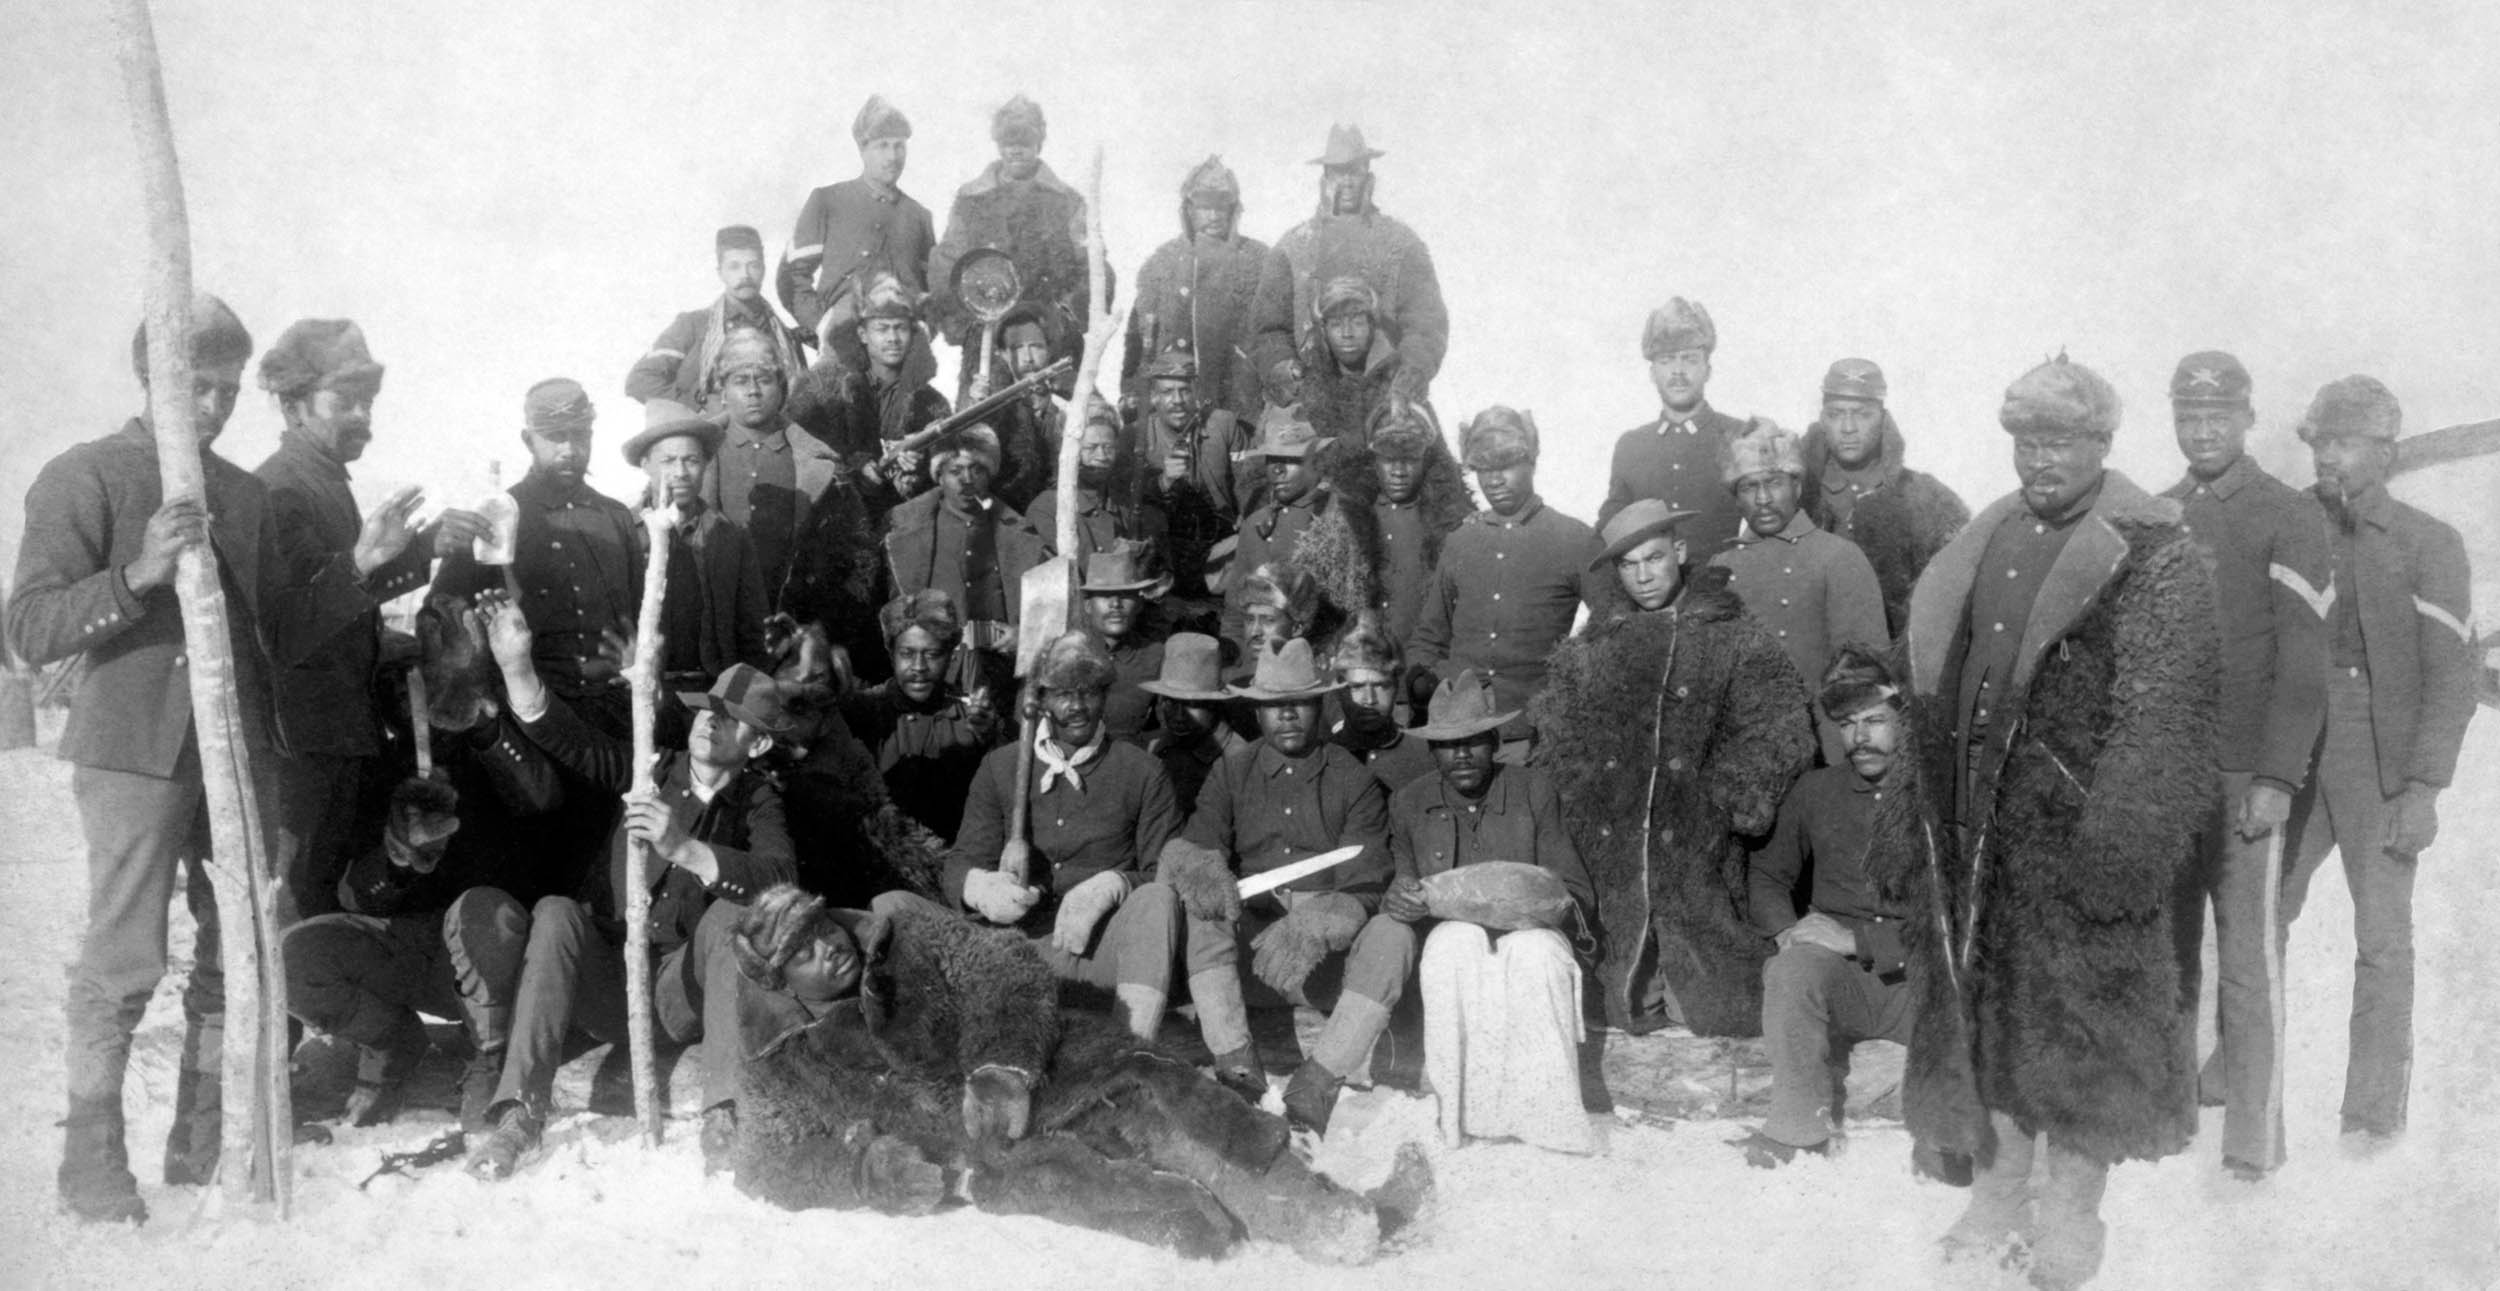 Buffalo Soldiers of 25th Infantry, some wearing buffalo robes, Fort Keogh, Montana, 1890 (Library of Congress)